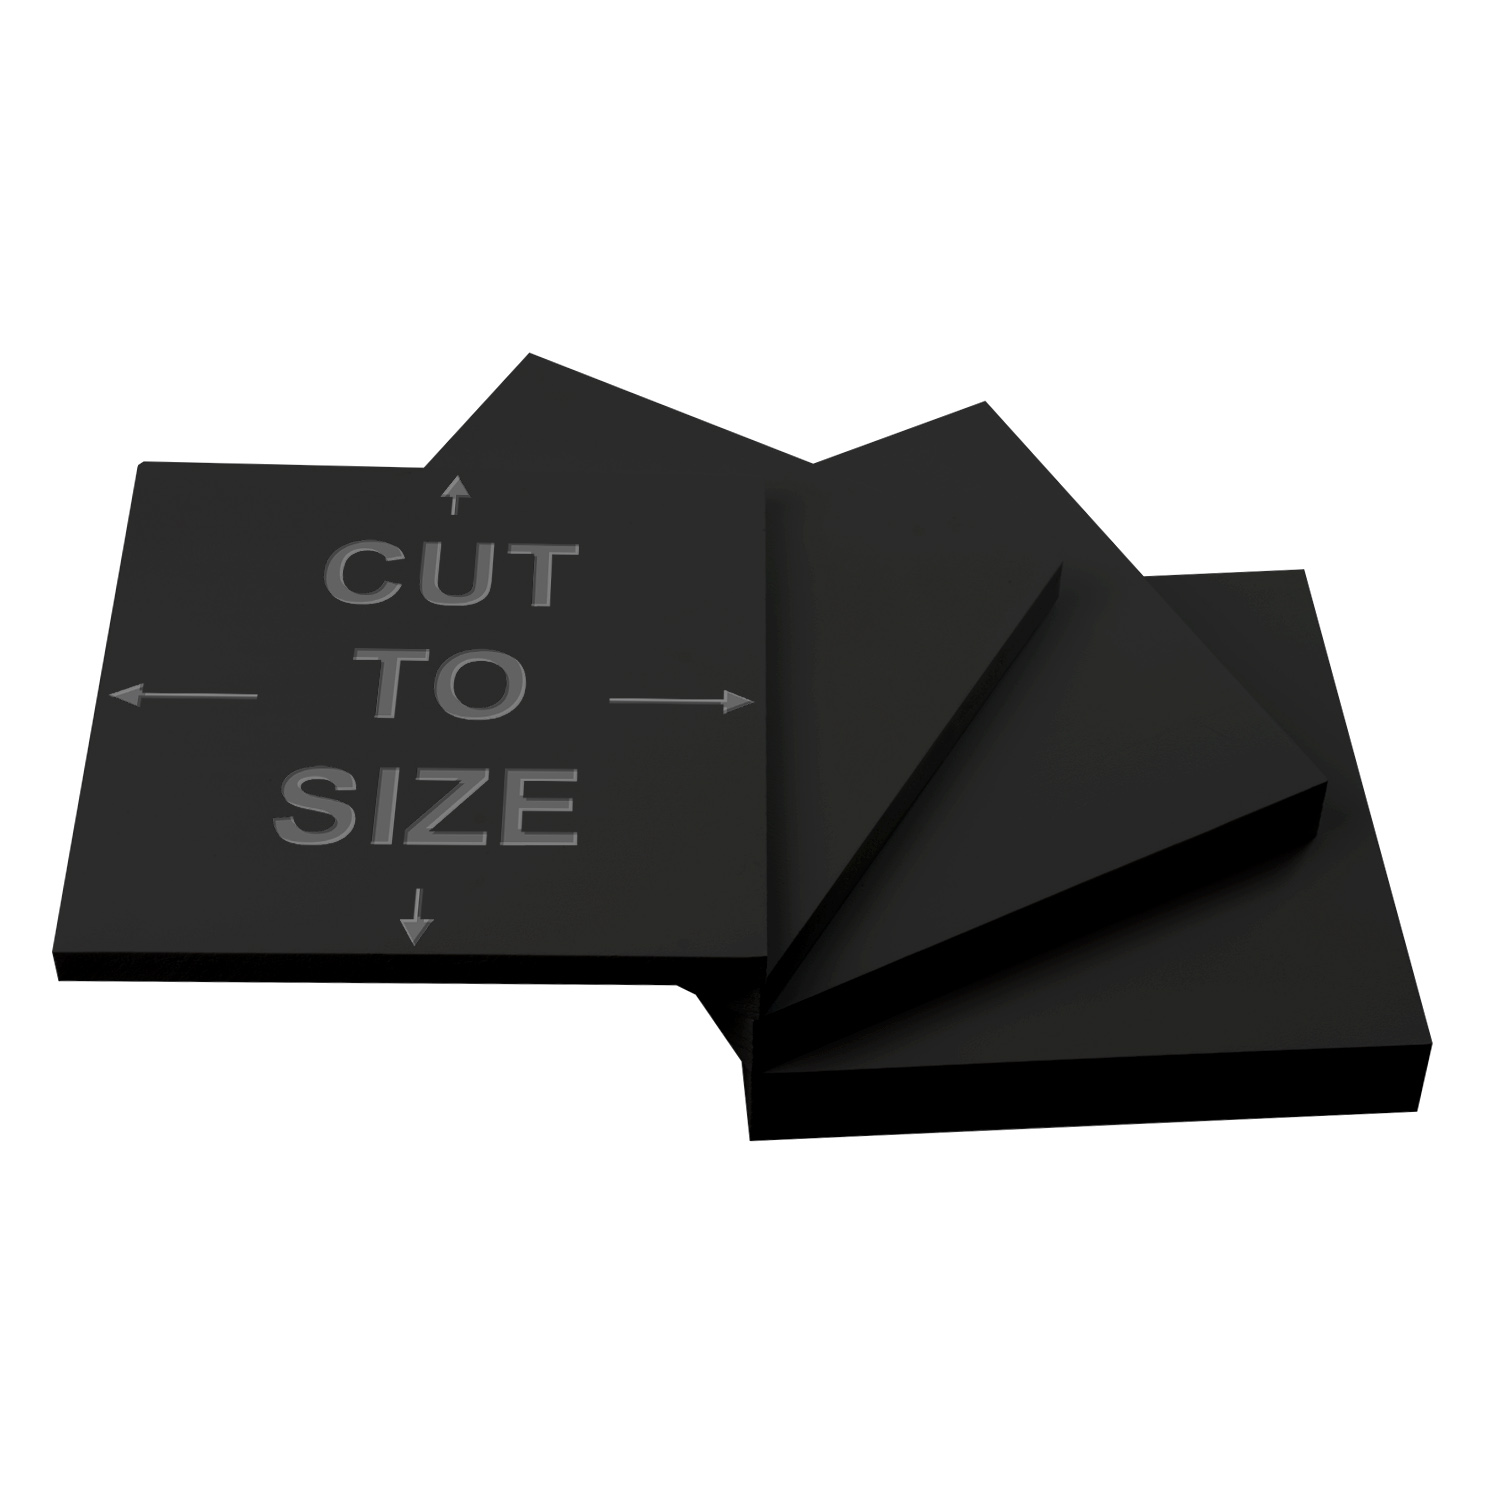 3mm 1/4 Holes x 24 x 48 Online Plastic Supply Black Perforated PVC Expanded Sheet 1/8 